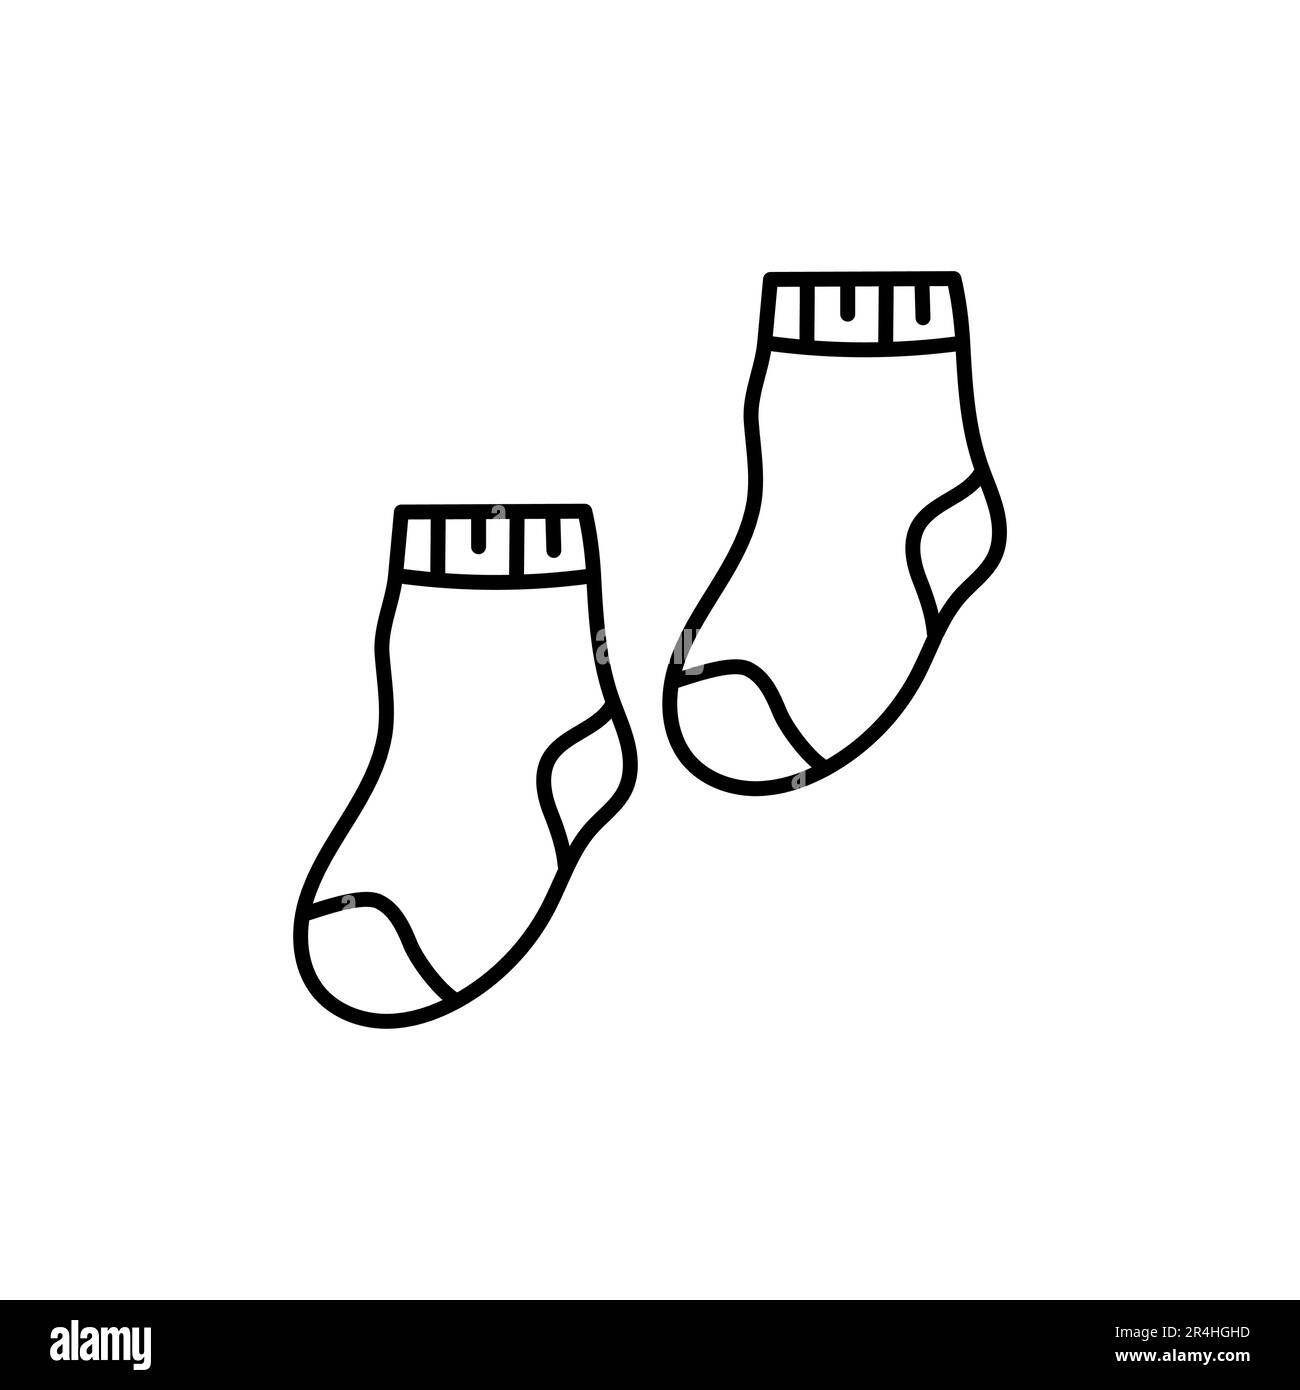 Pair of socks for newborn baby hand drawn outline doodle icon